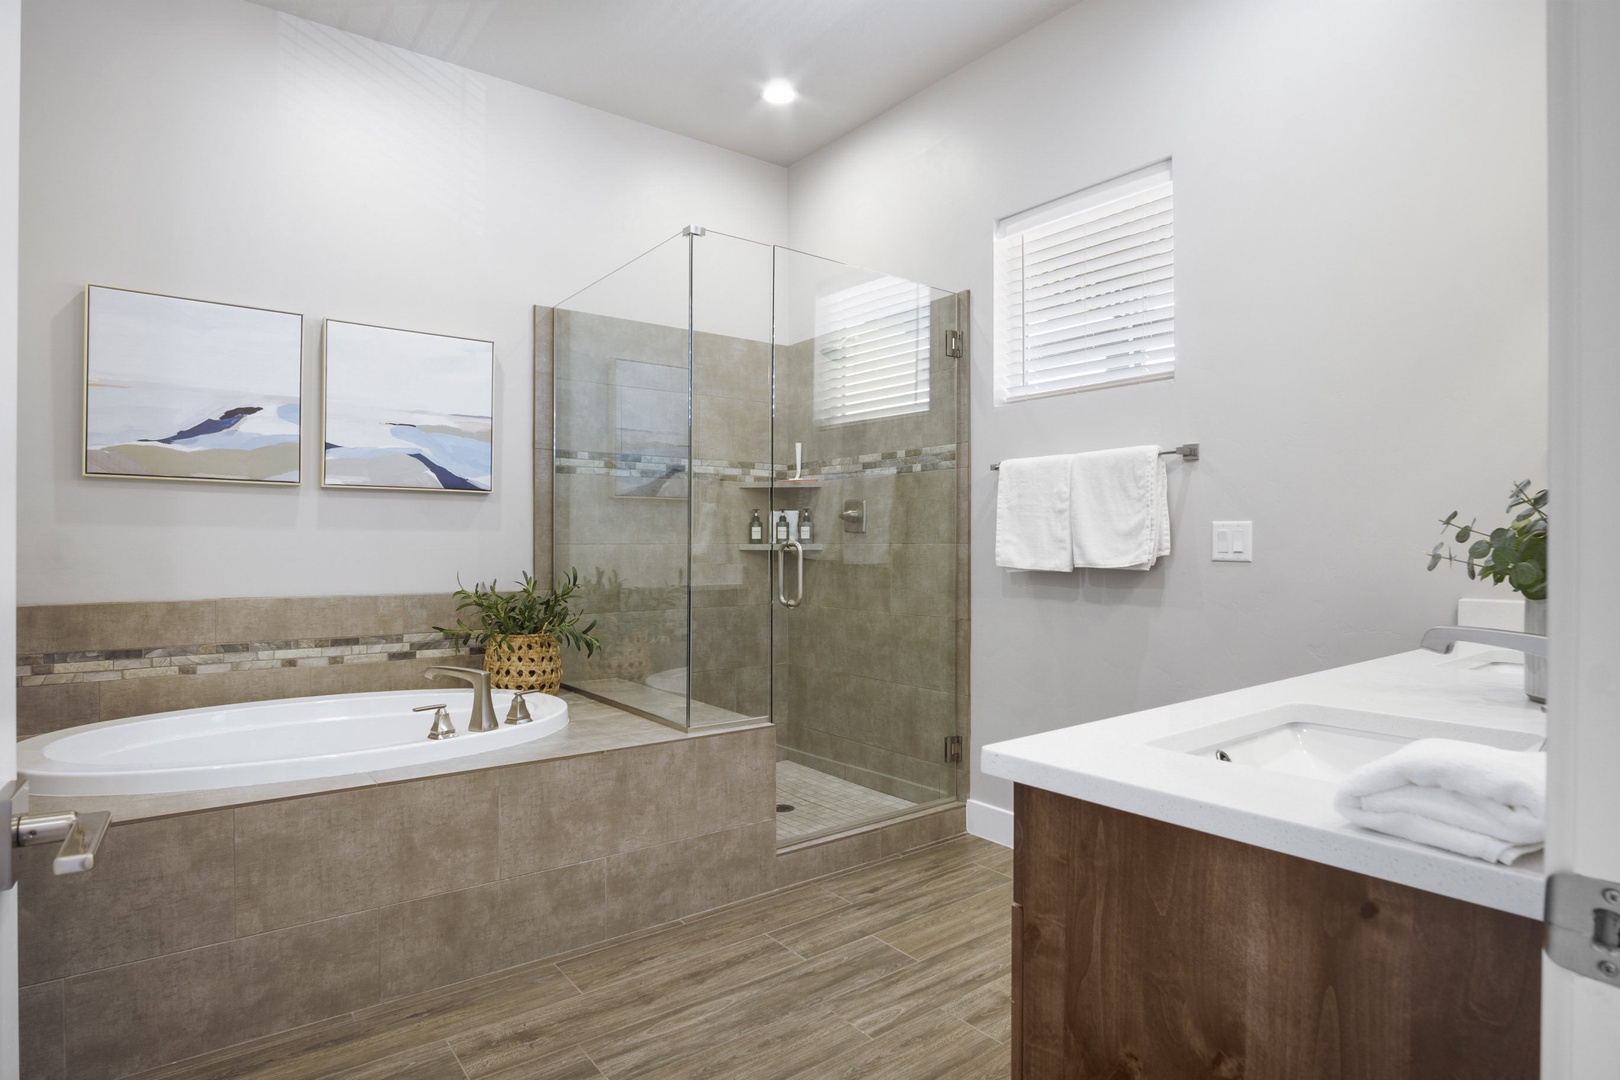 Full bathroom 2 with separate soaking tub, stand up shower (second floor)